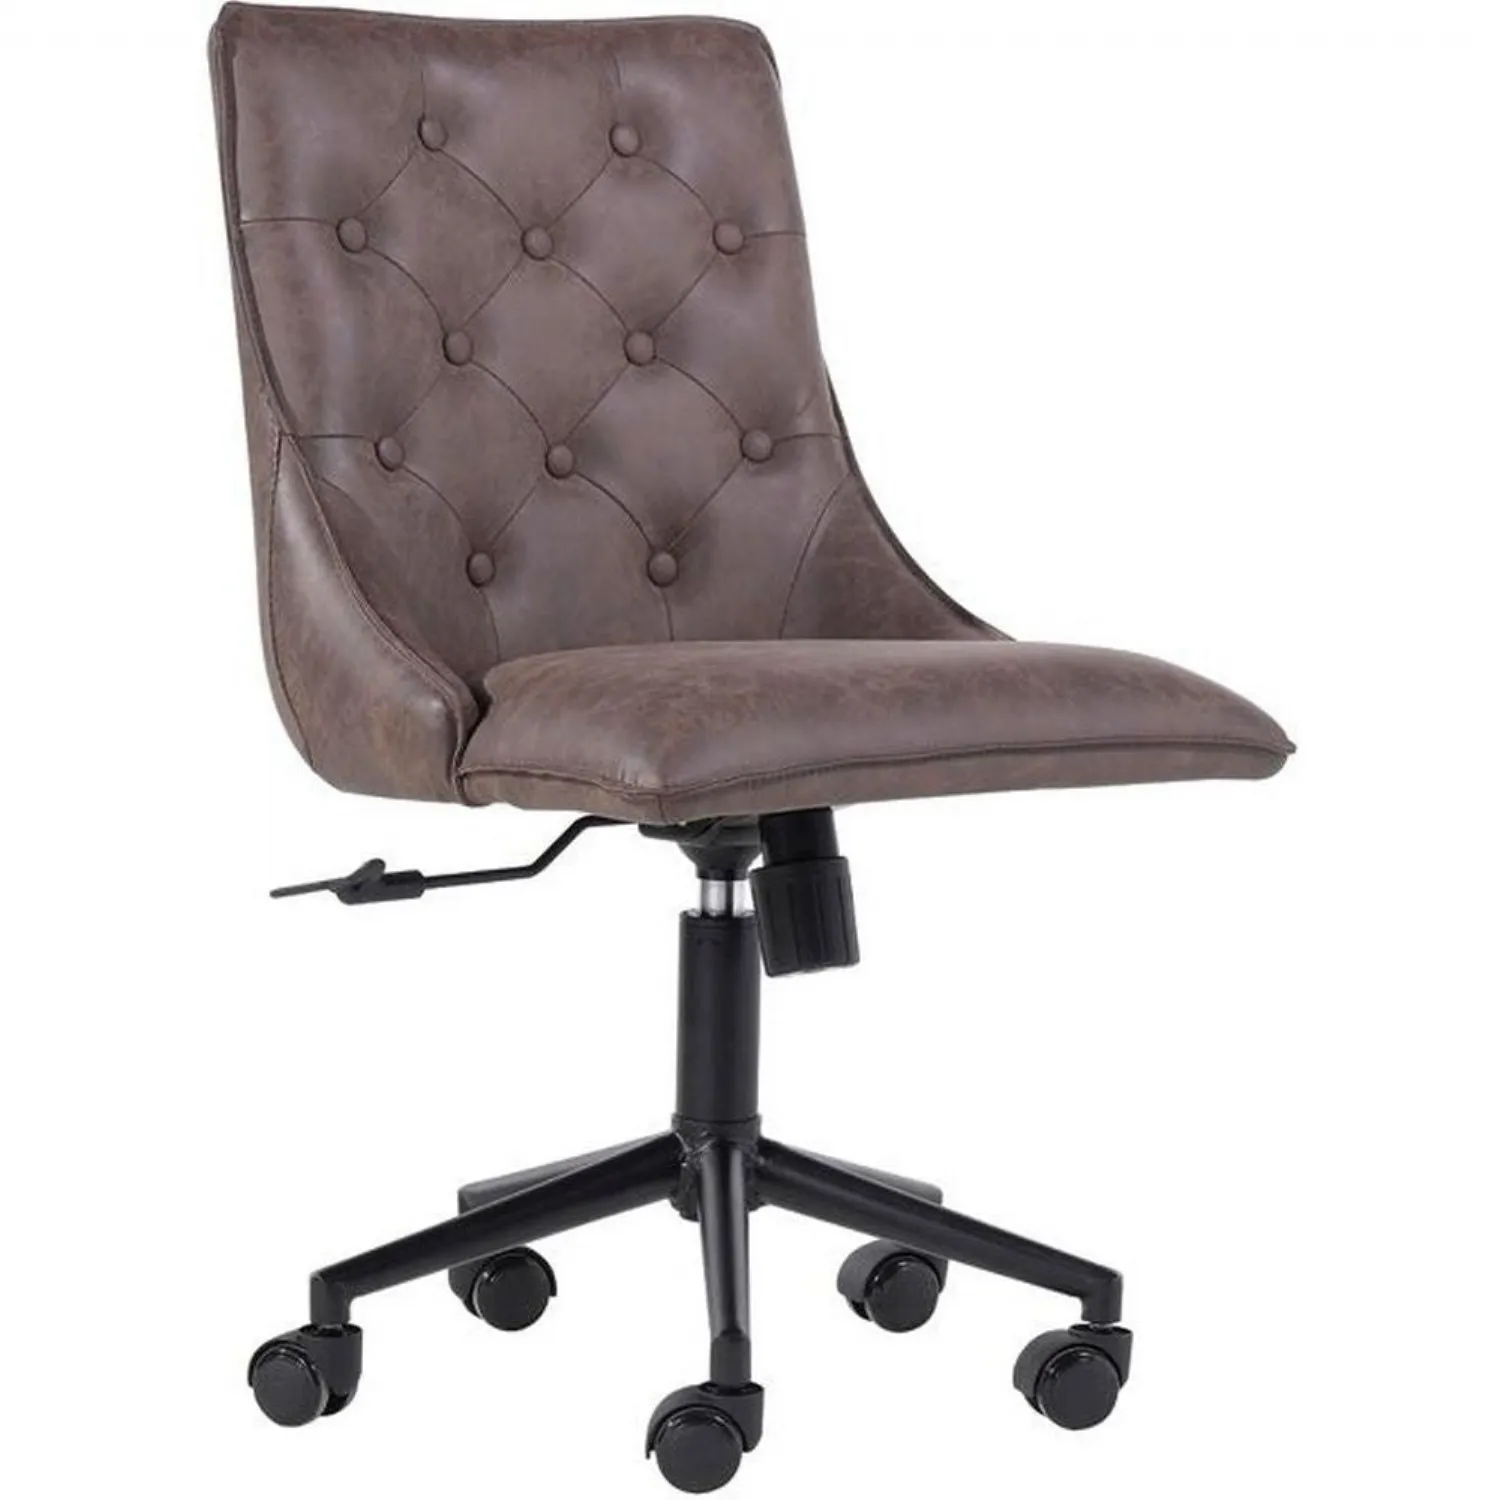 The Chair Collection Brown Button Back Office